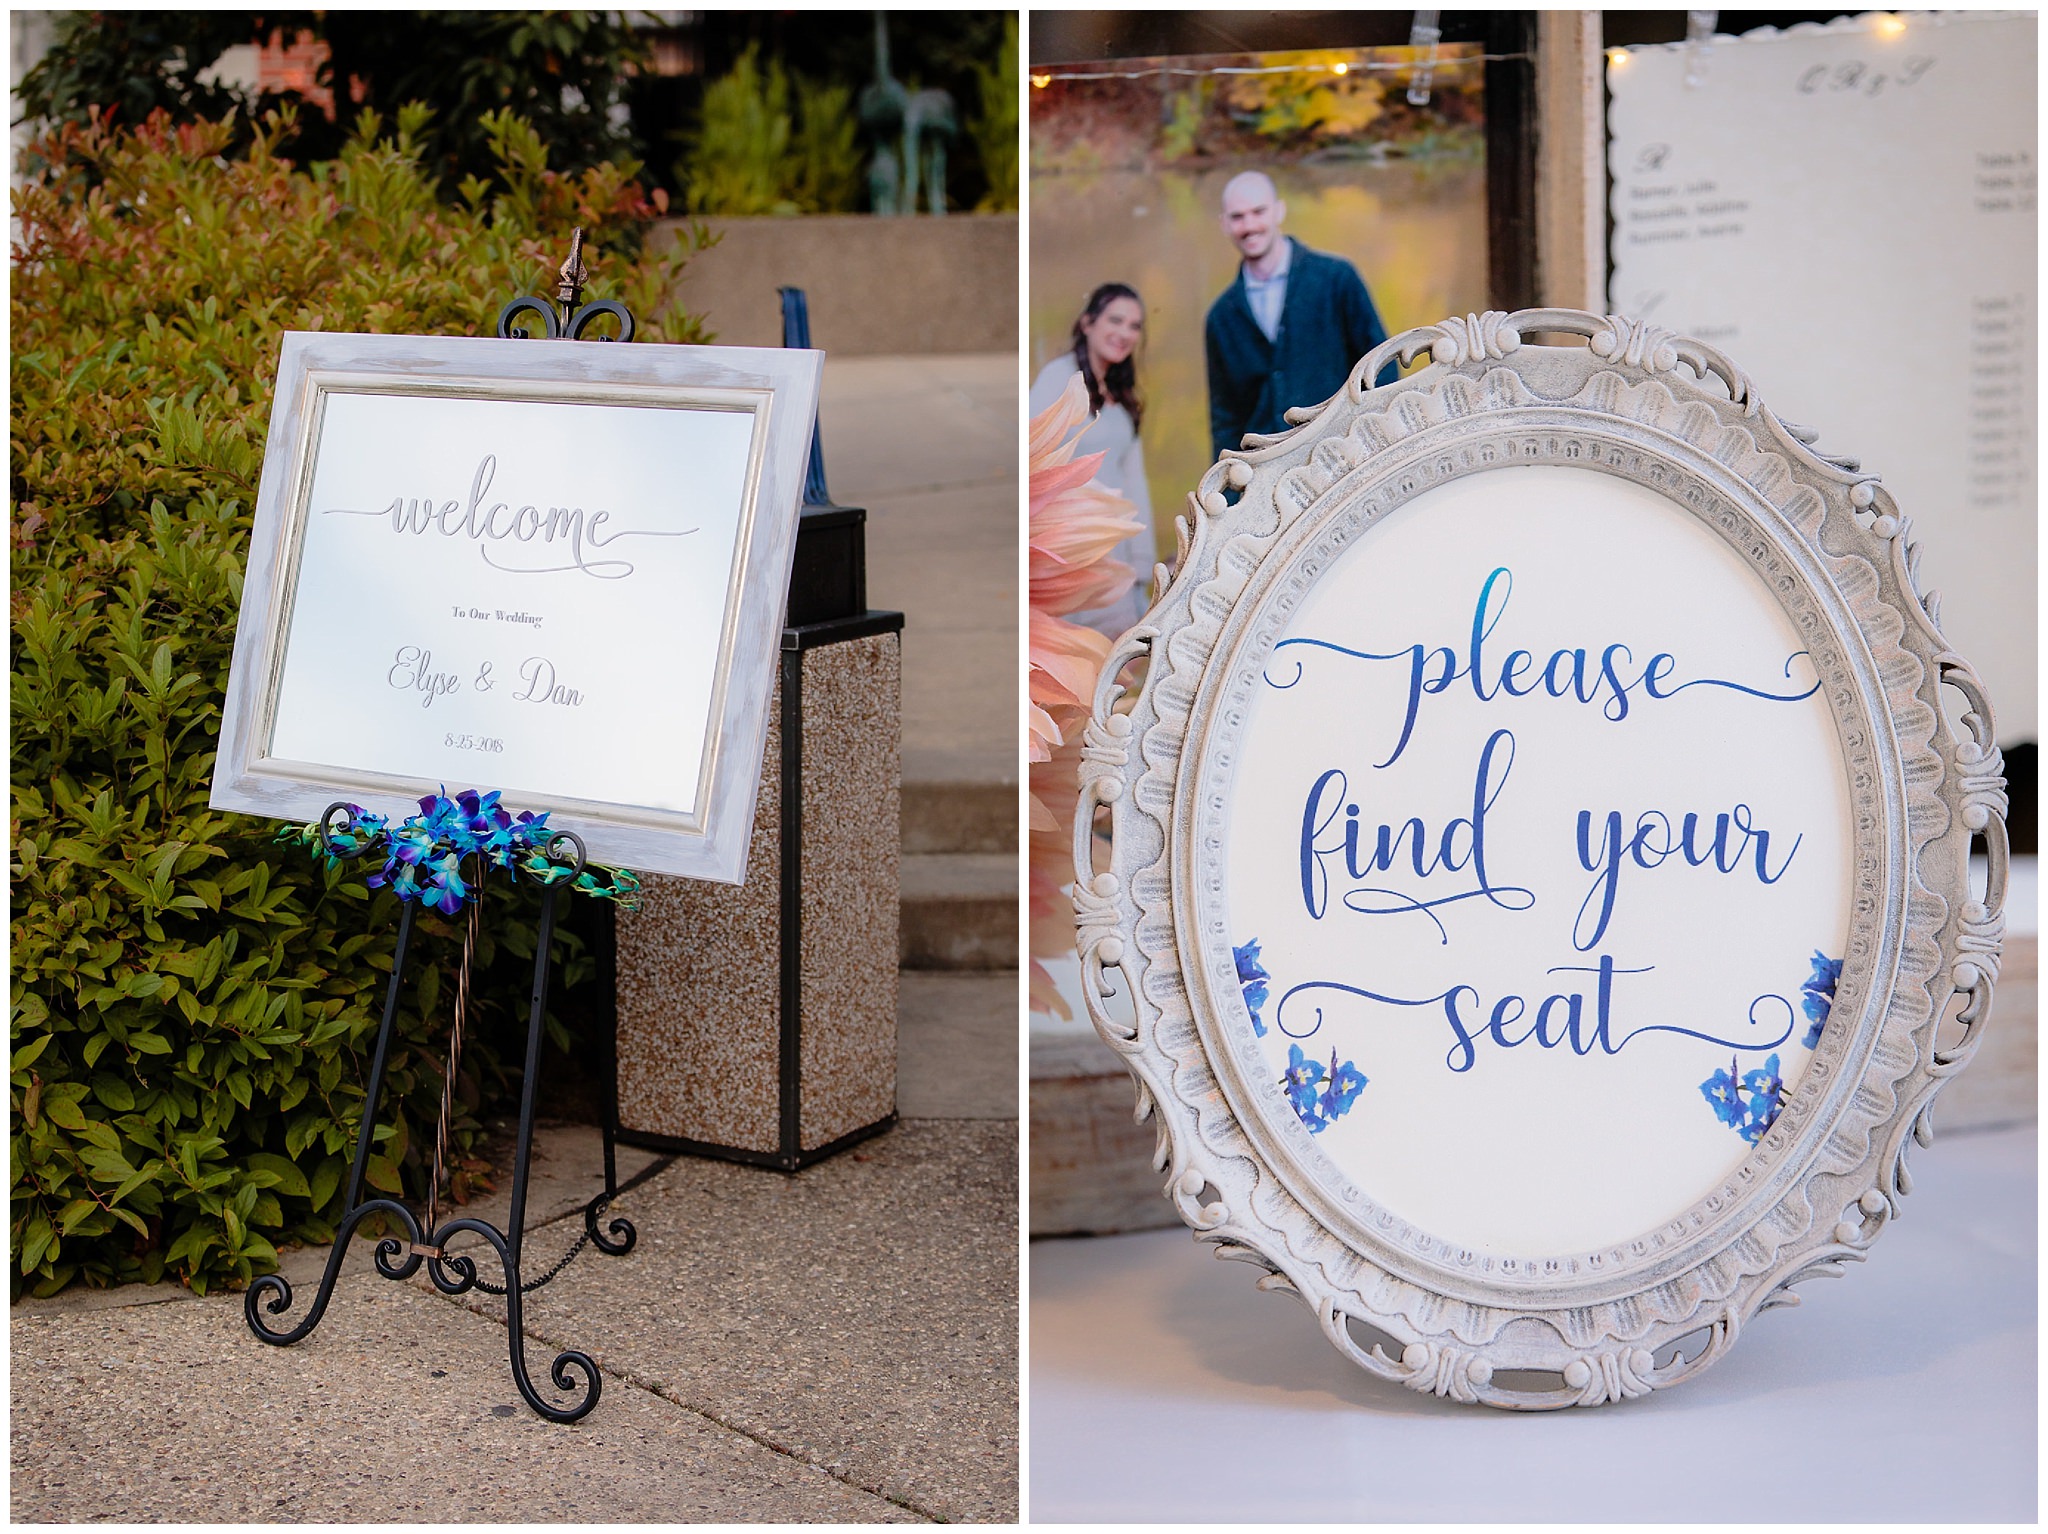 Welcome & find your seat signs at a National Aviary wedding